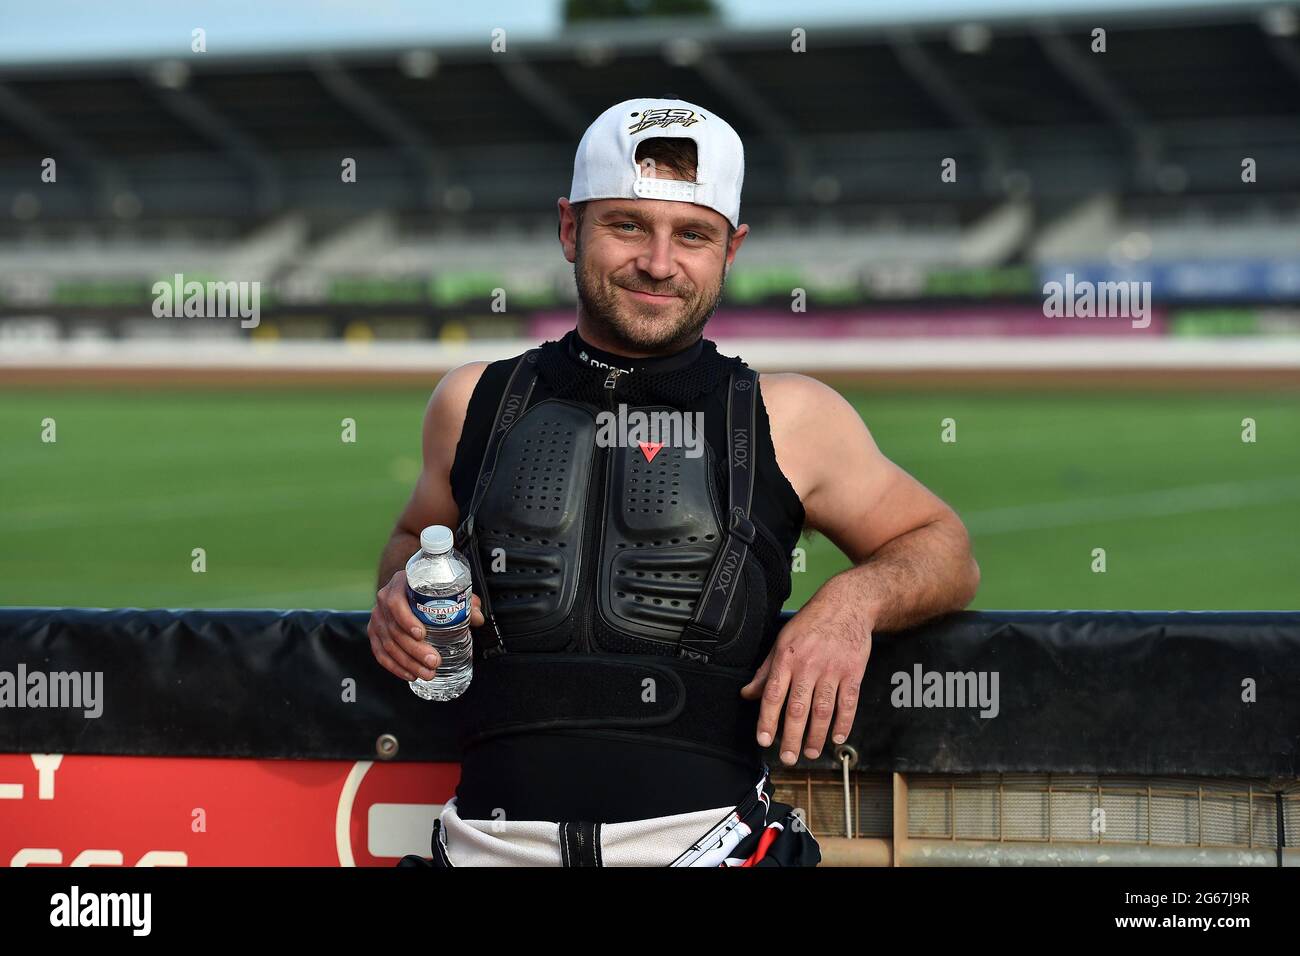 MANCHESTER, UK. JULY 2ND Benji Compton during the National Development League match between Belle Vue Aces and Kent Royals at the National Speedway Stadium, Manchester on Friday 2nd July 2021. (Credit: Eddie Garvey | MI News) Credit: MI News & Sport /Alamy Live News Stock Photo